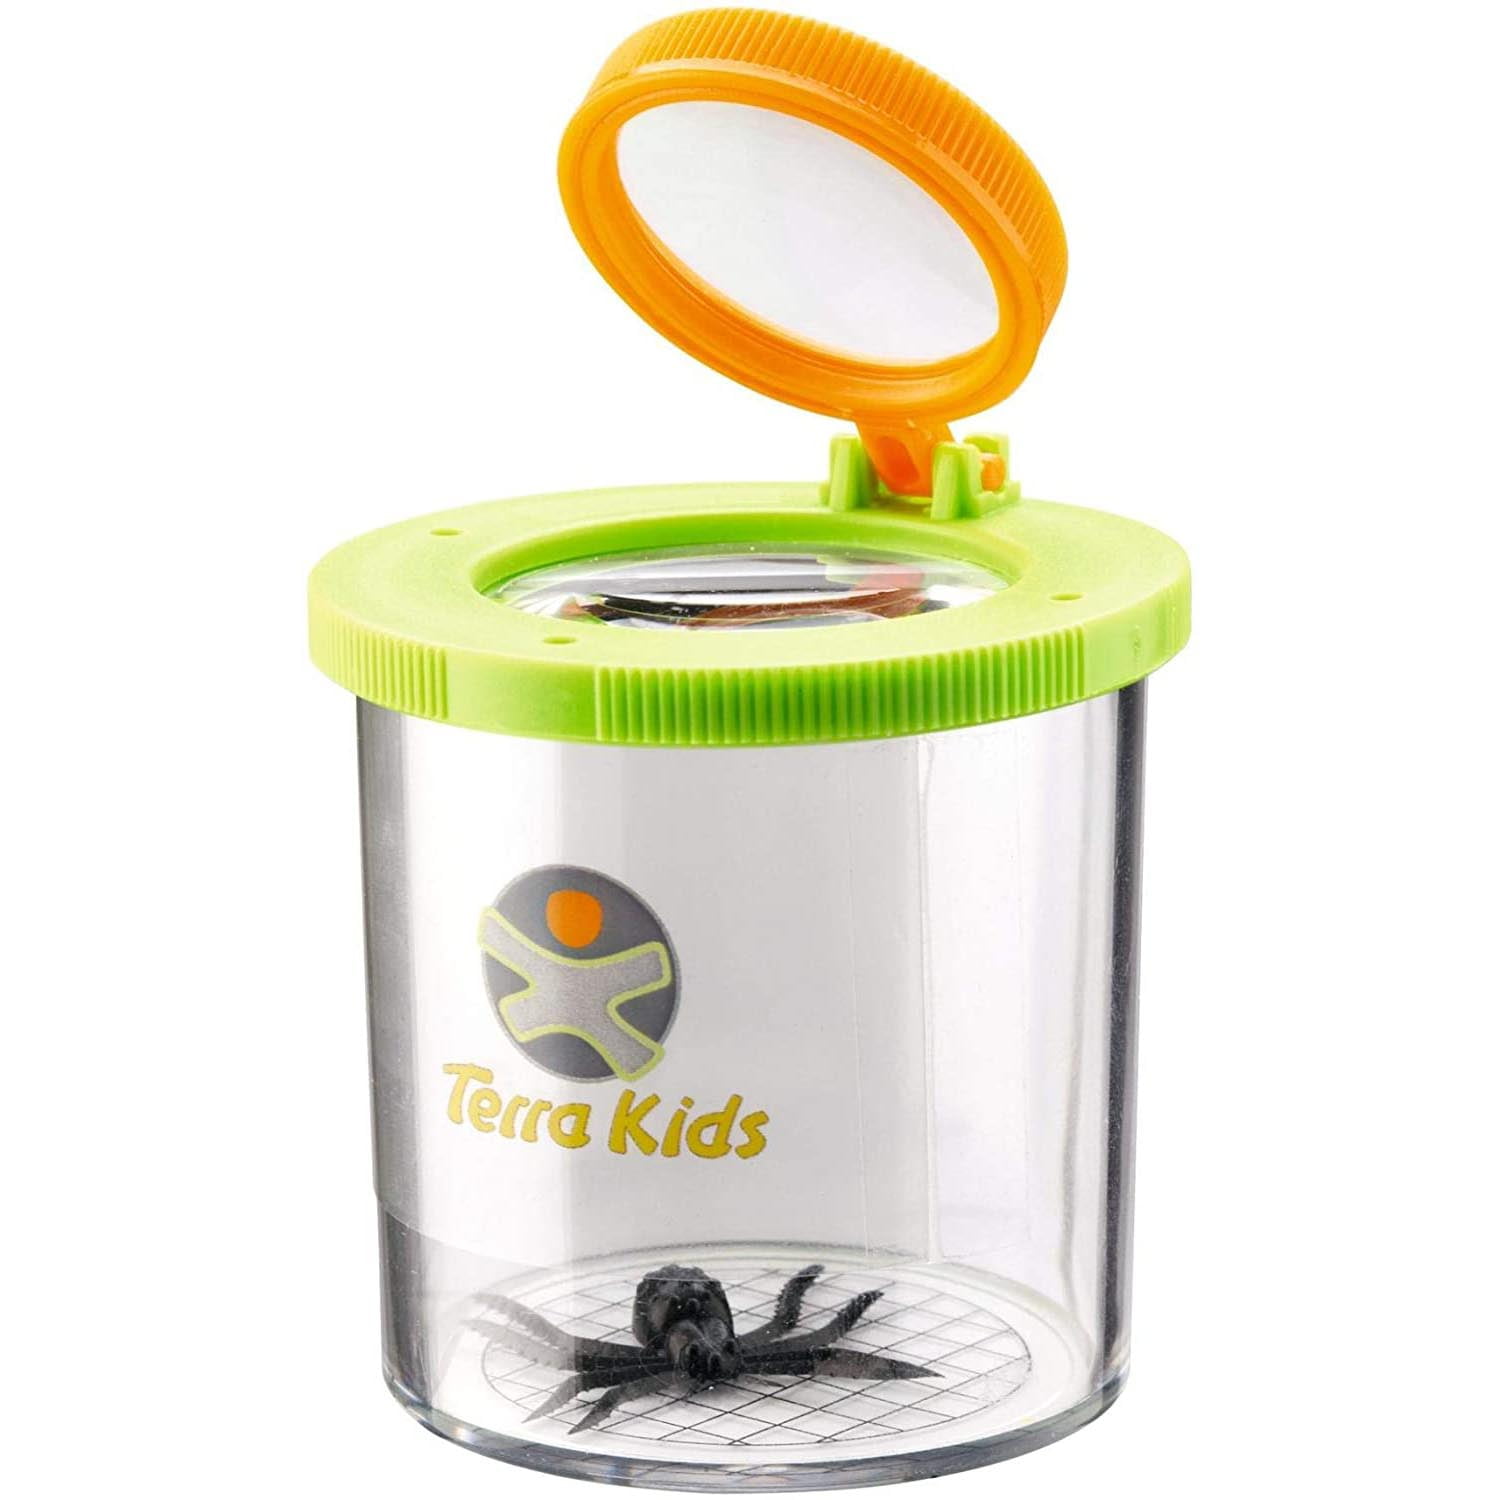 Travel Insect Catcher Insect Cage School Small Viewer Clear With Lids Bug Box N3 